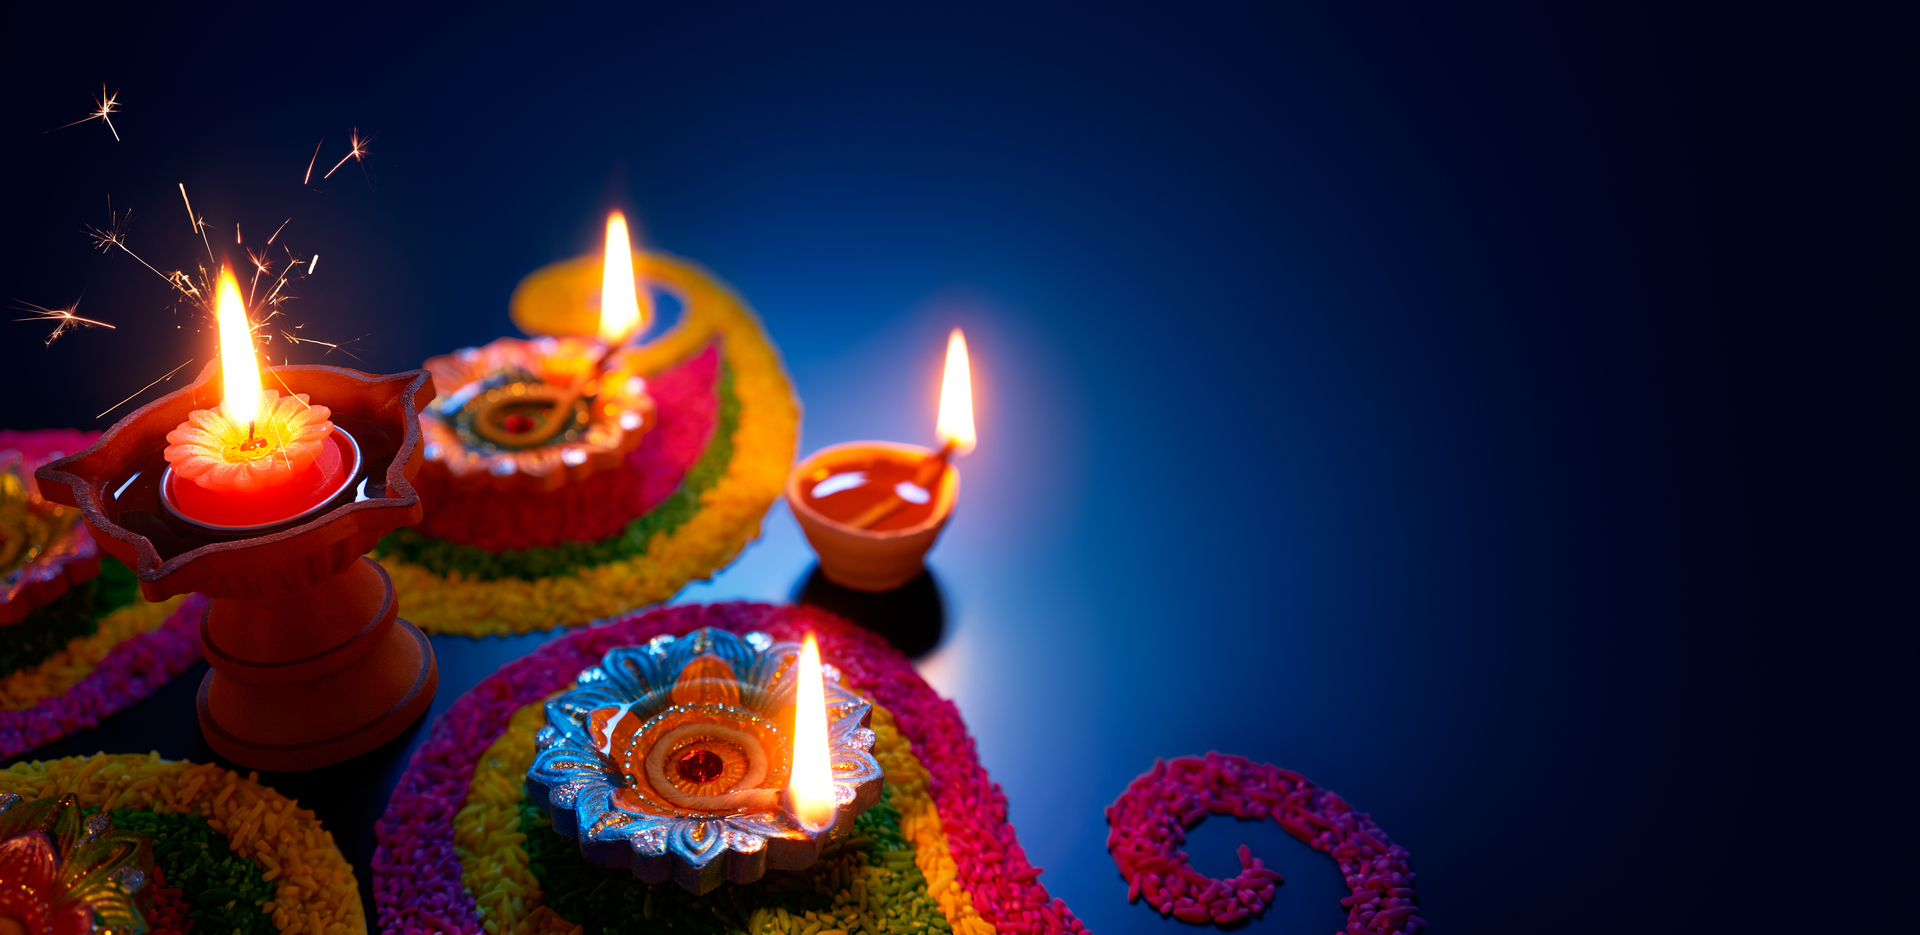 diwali-2019-celebrate-diwali-as-a-festival-of-connections-with-club